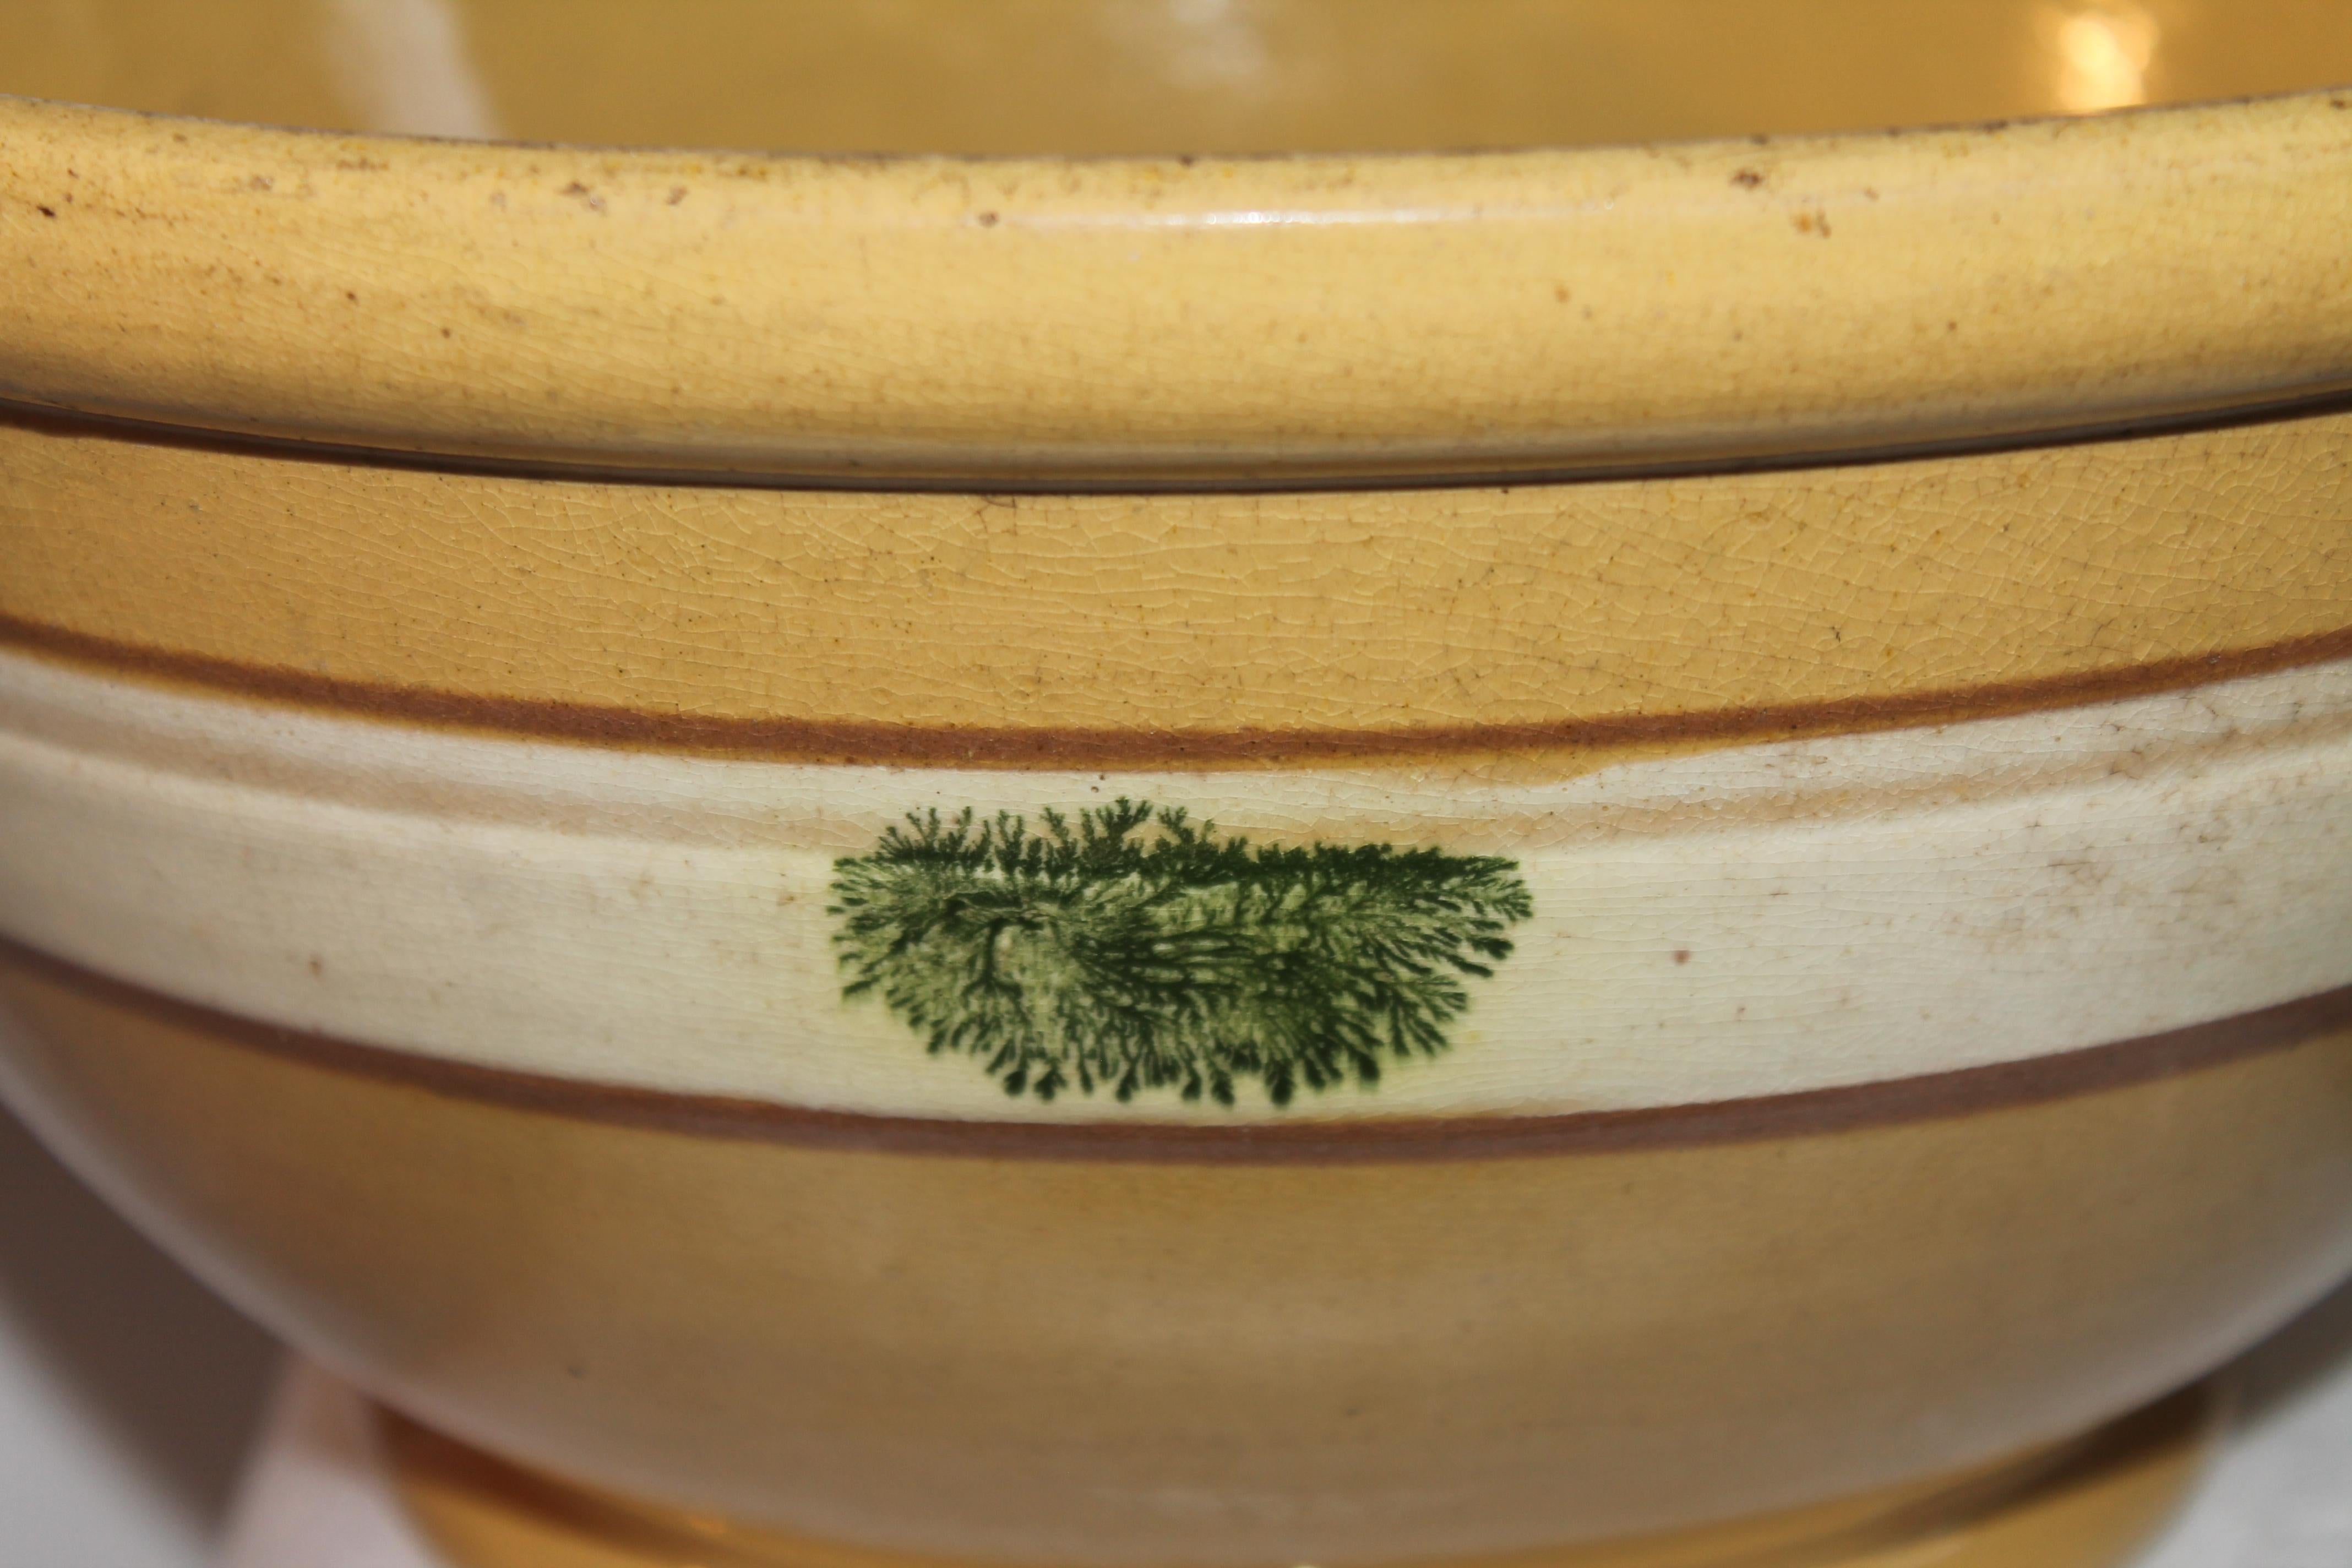 how to determine age of yellow ware bowls